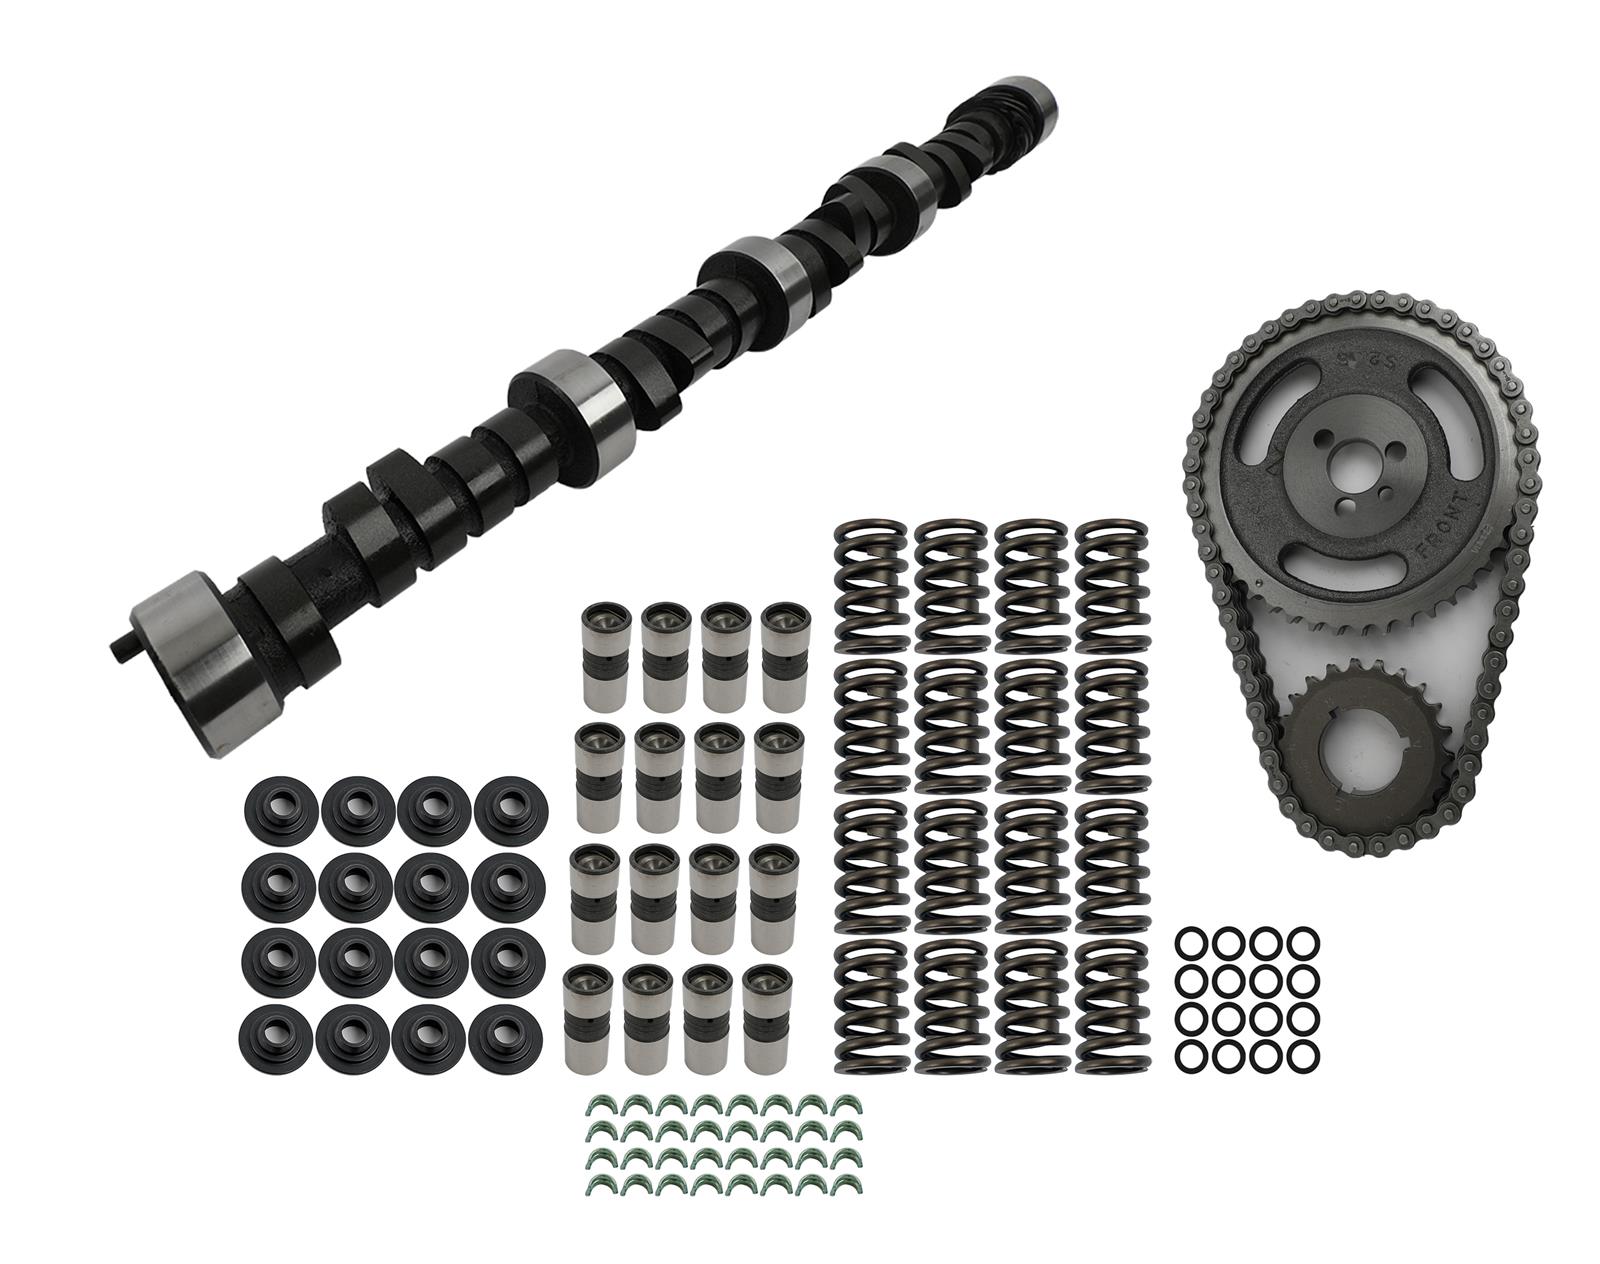 COMP Cams K12-238-2 Xtreme Energy 218/224 Hydraulic Flat Cam K-Kit for Chevrolet Small Block 